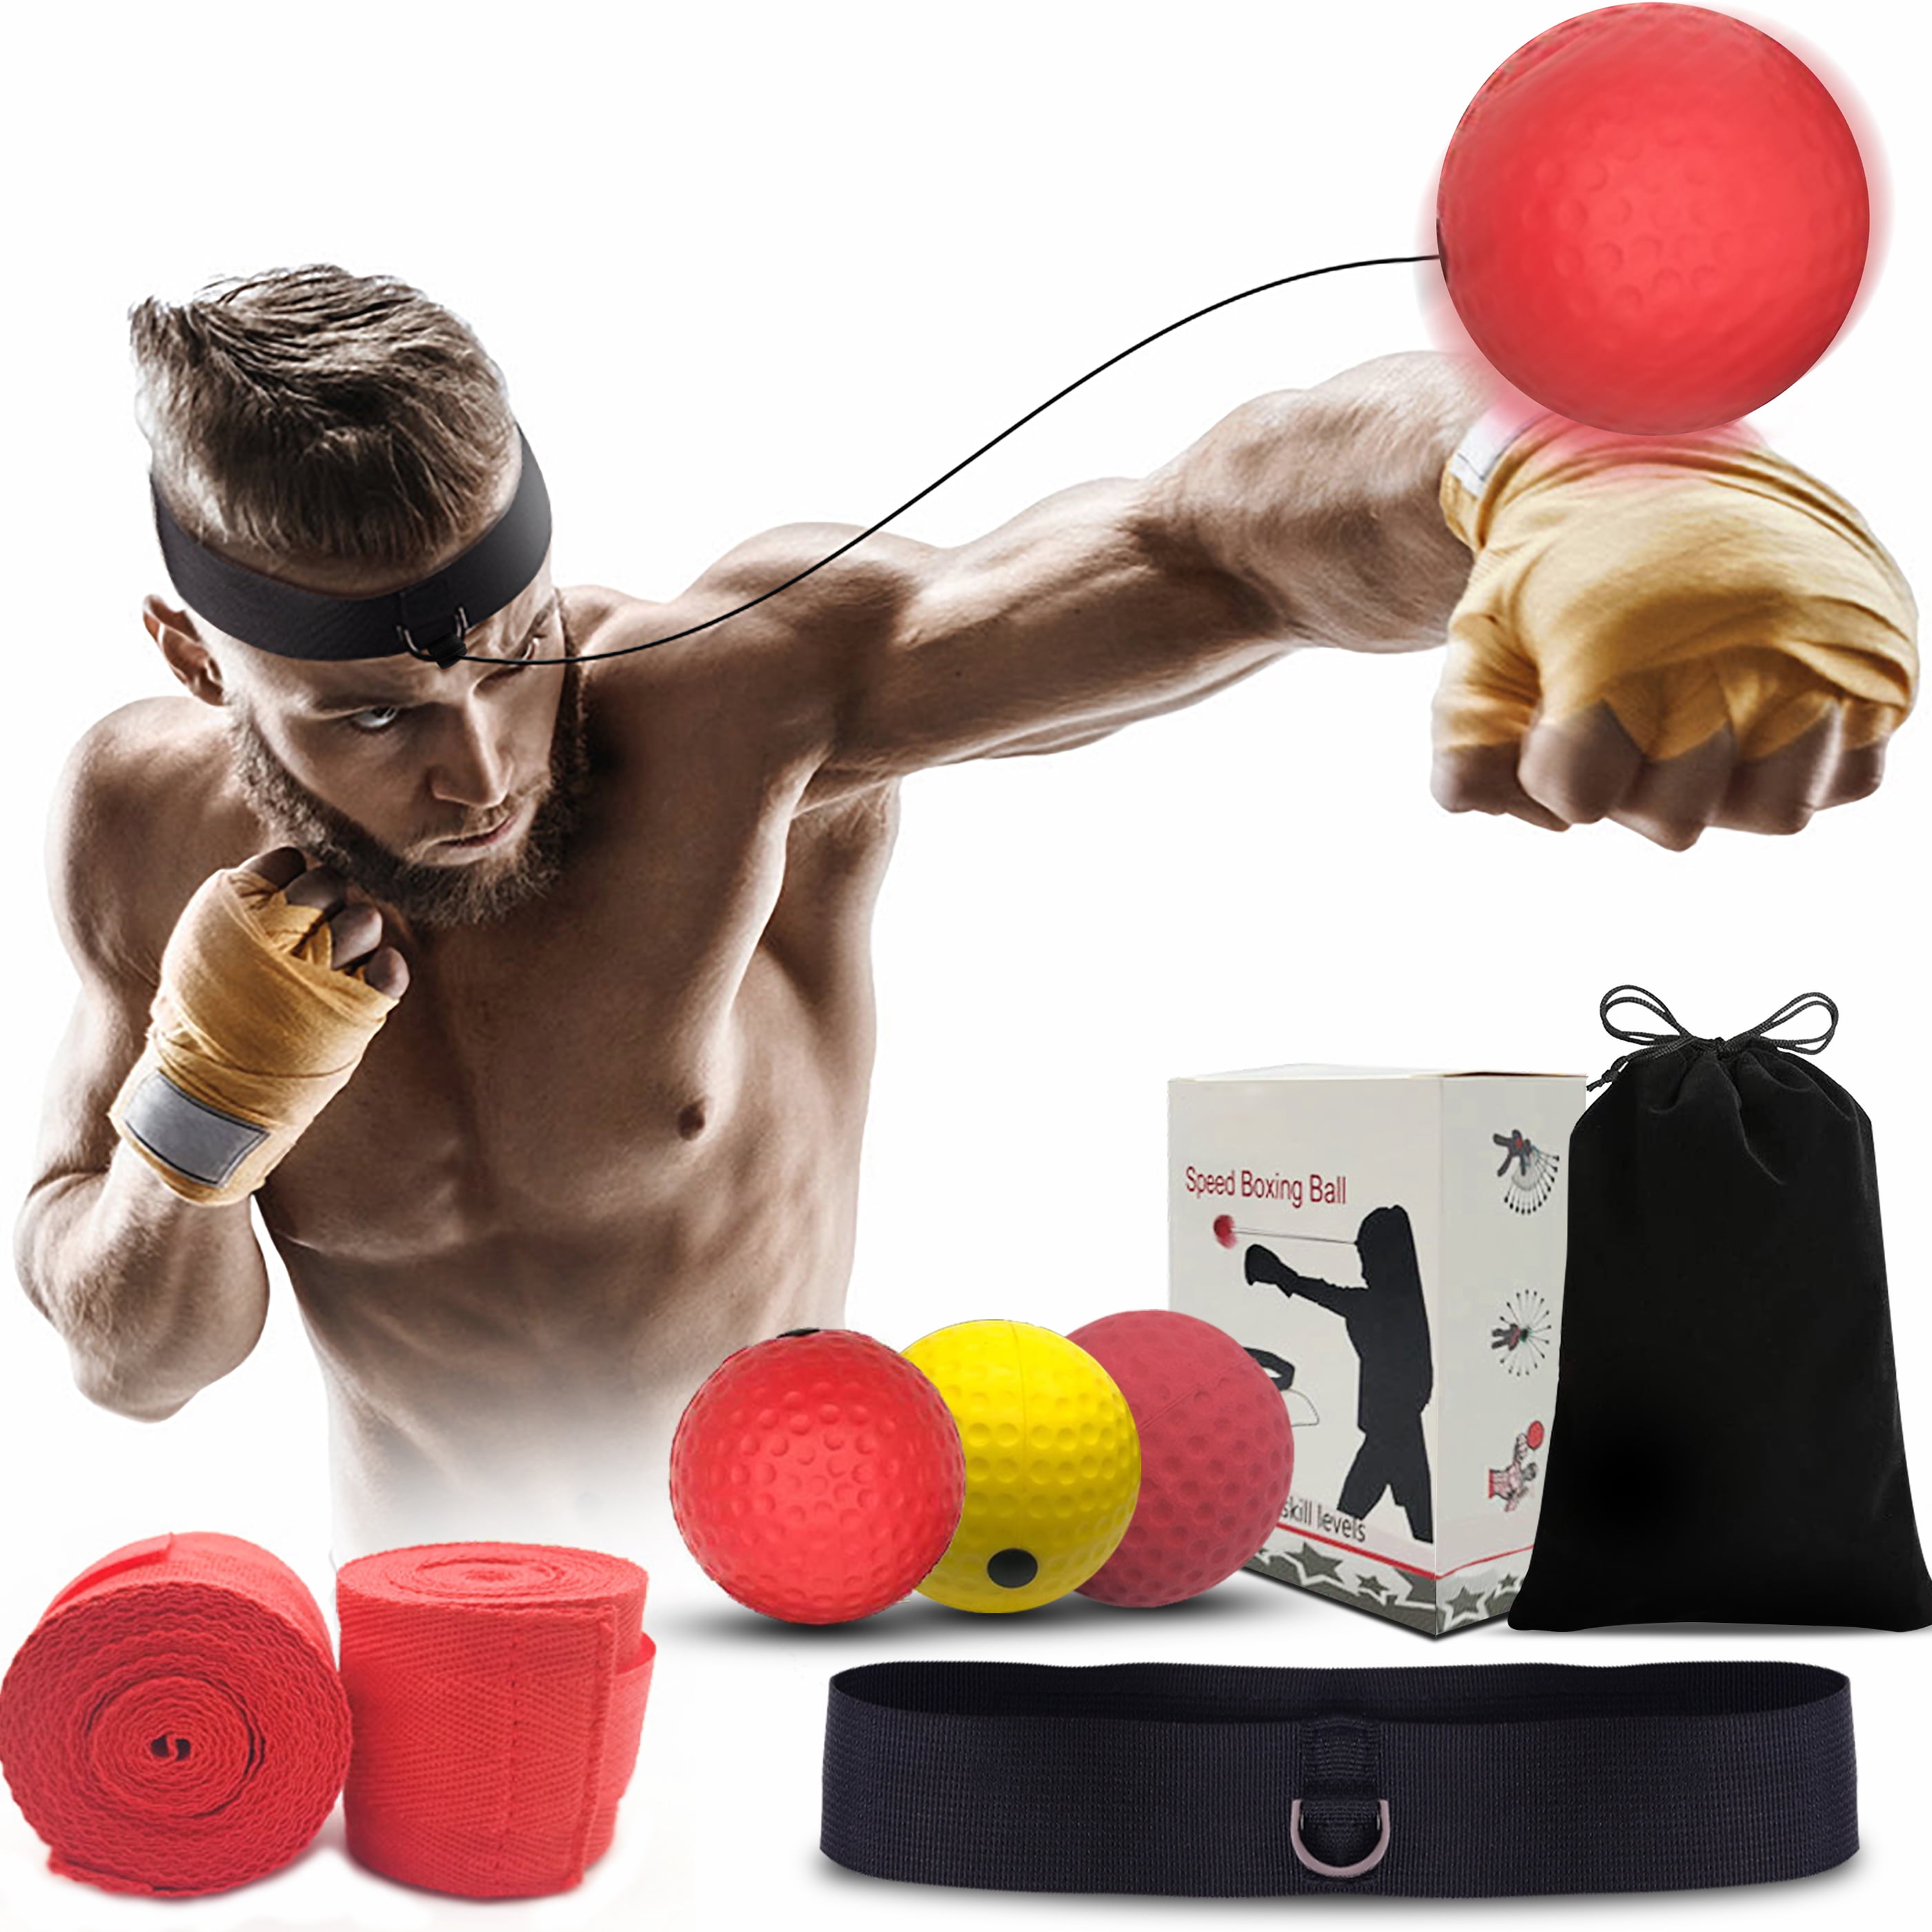 Boxing excercise fighting speed training BOXING trainer headband reflex ball 